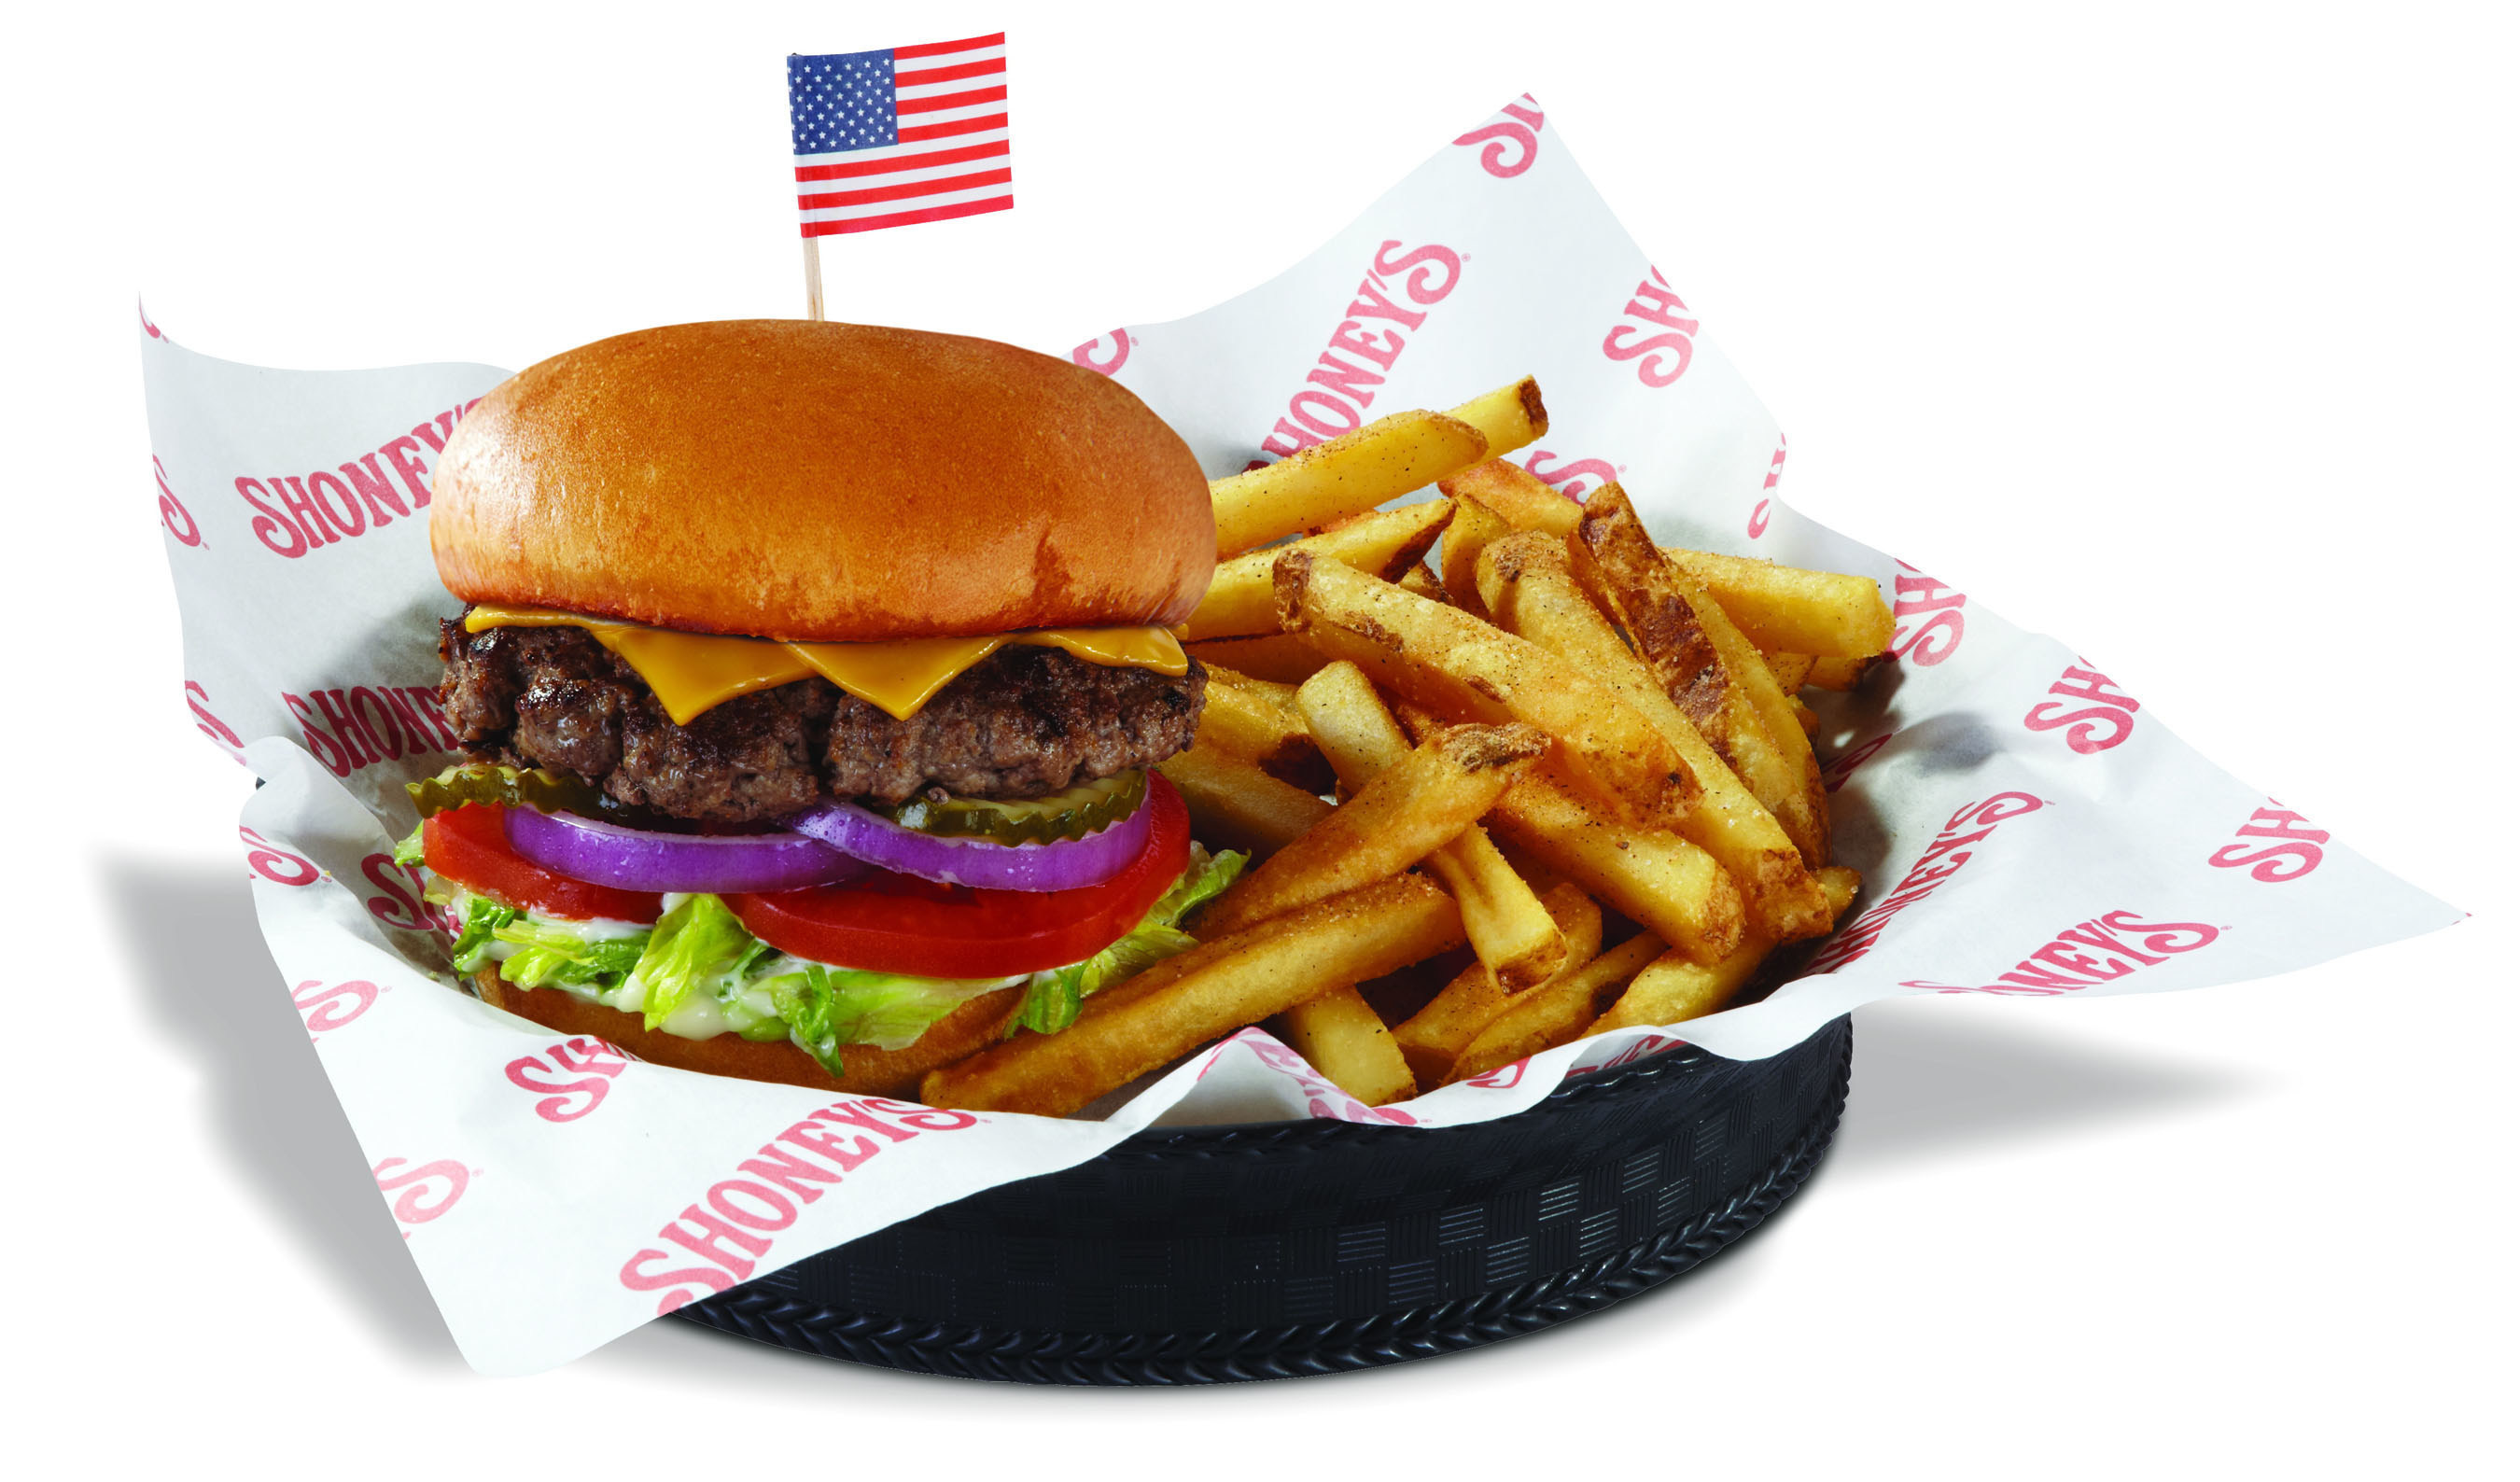 Shoney's(R) Offers Free All-American Burger(TM) to All Veterans and Troops on Their Special Day.